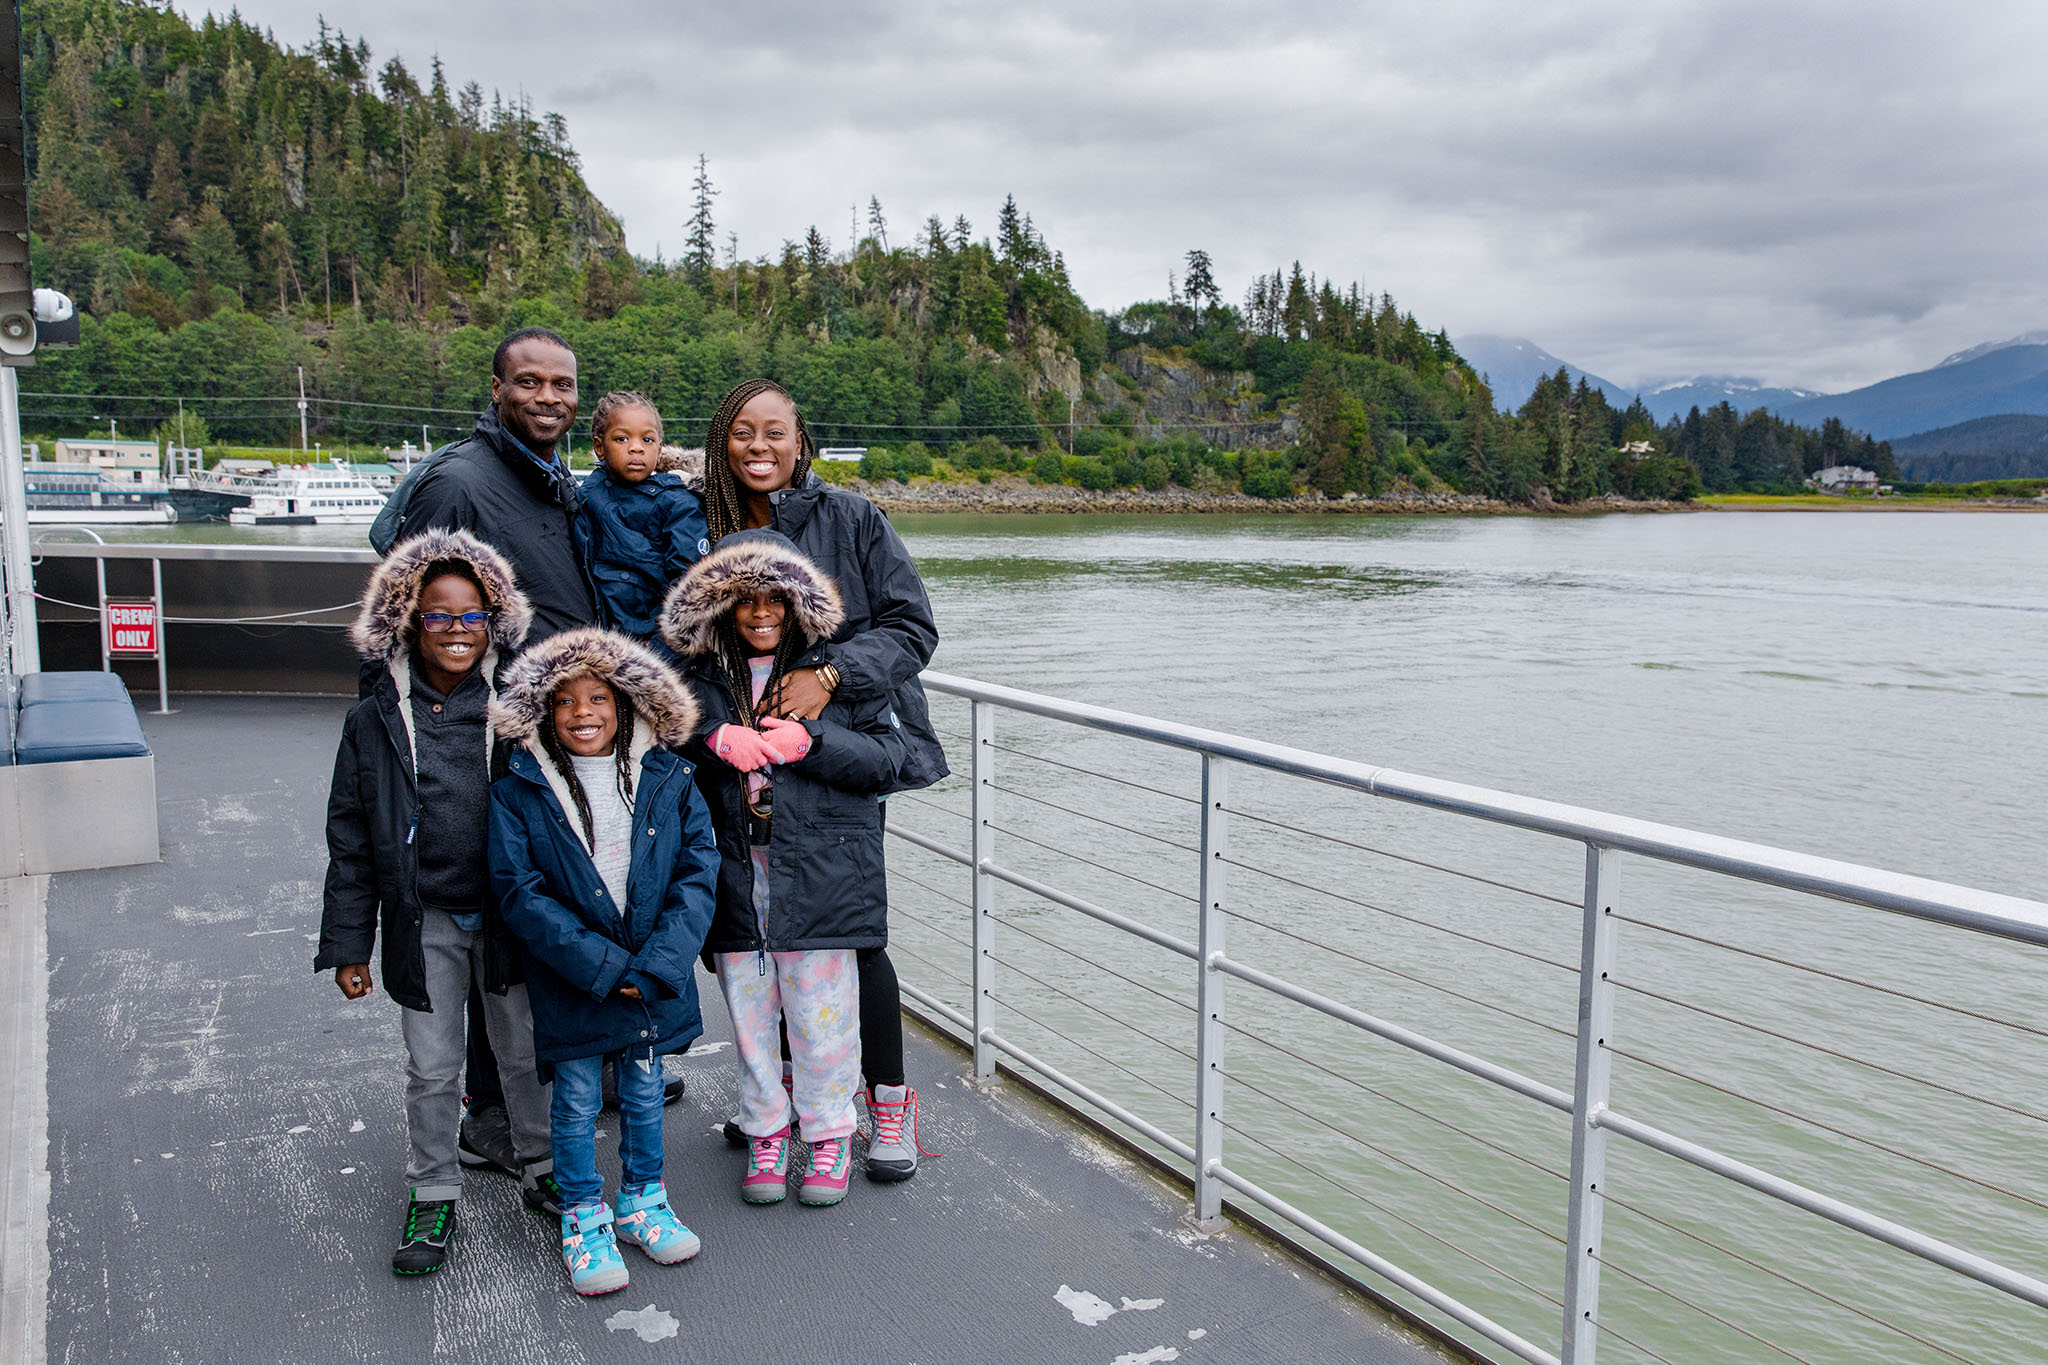 A family of six stands on a ferry deck, warmly dressed in winter coats, with Alaska’s gey waters and green, rugged hills in the background.